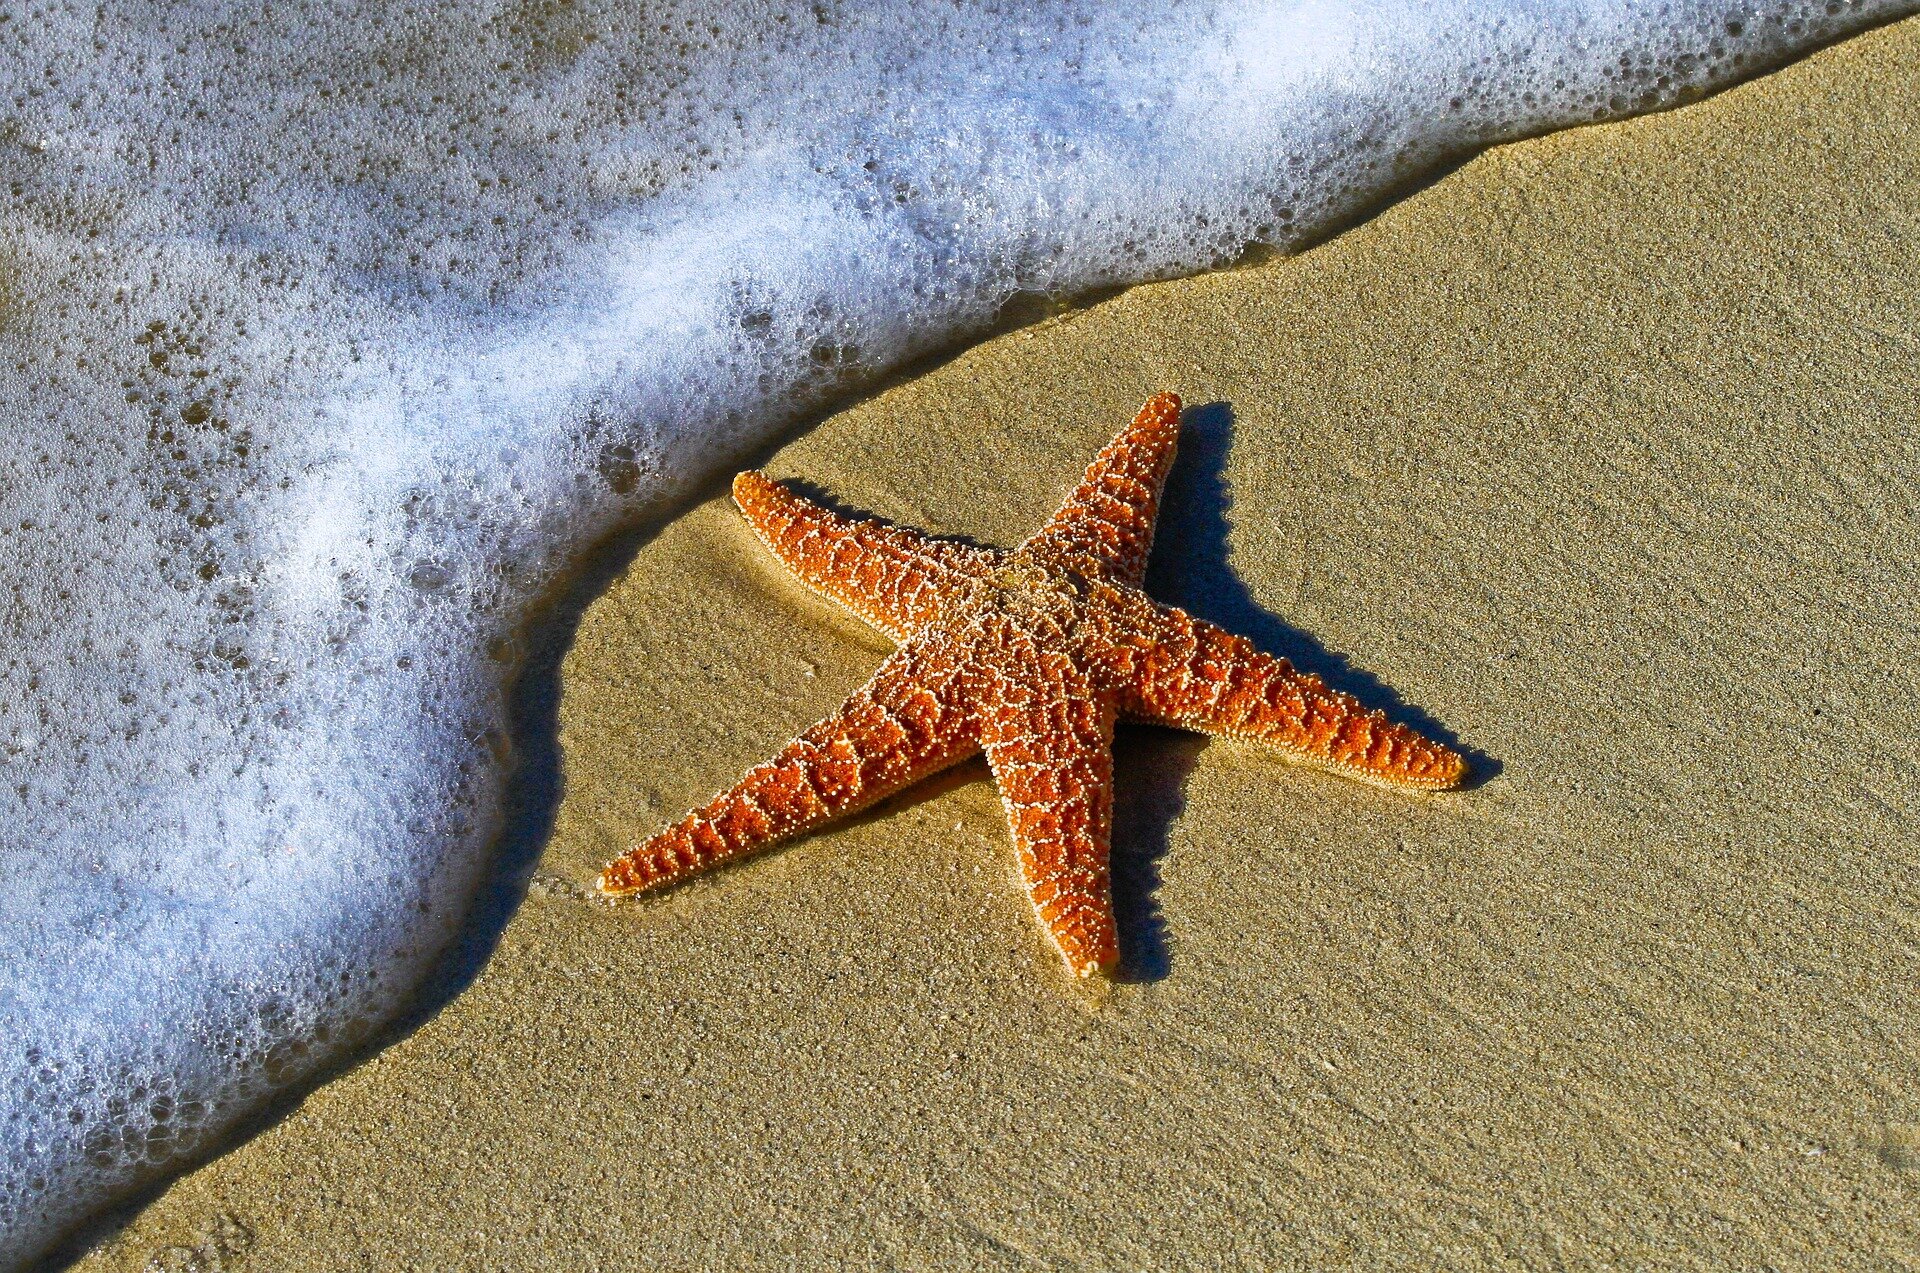 Disease nearly wiped out sea stars on California's Central Coast